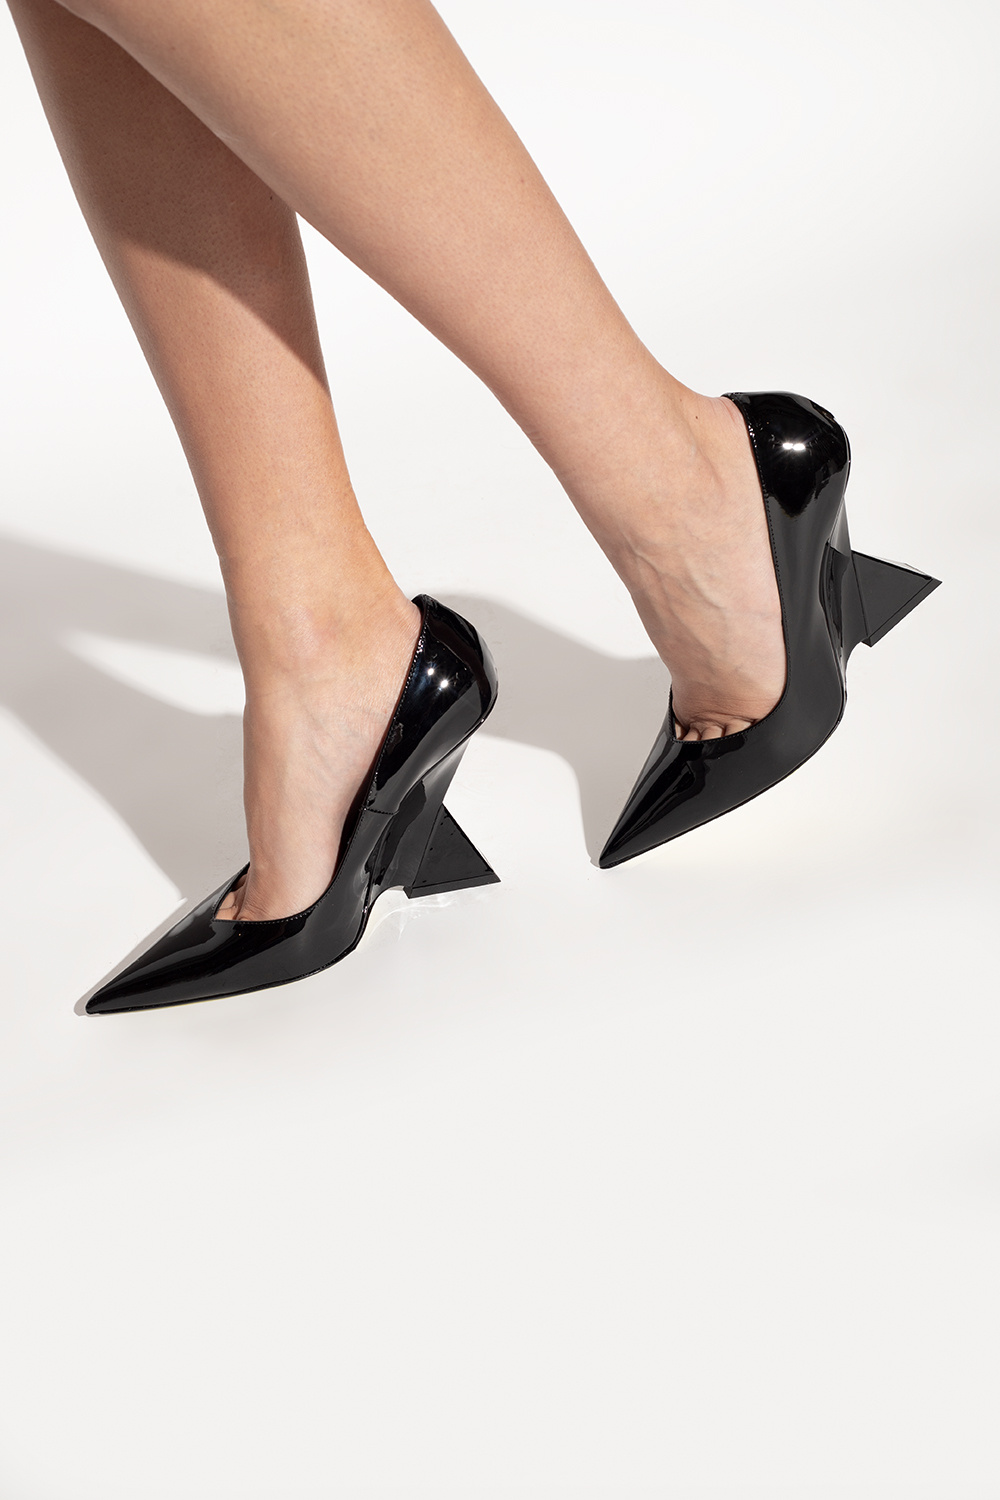 The Attico ‘Cheope’ patent leather wedge mules